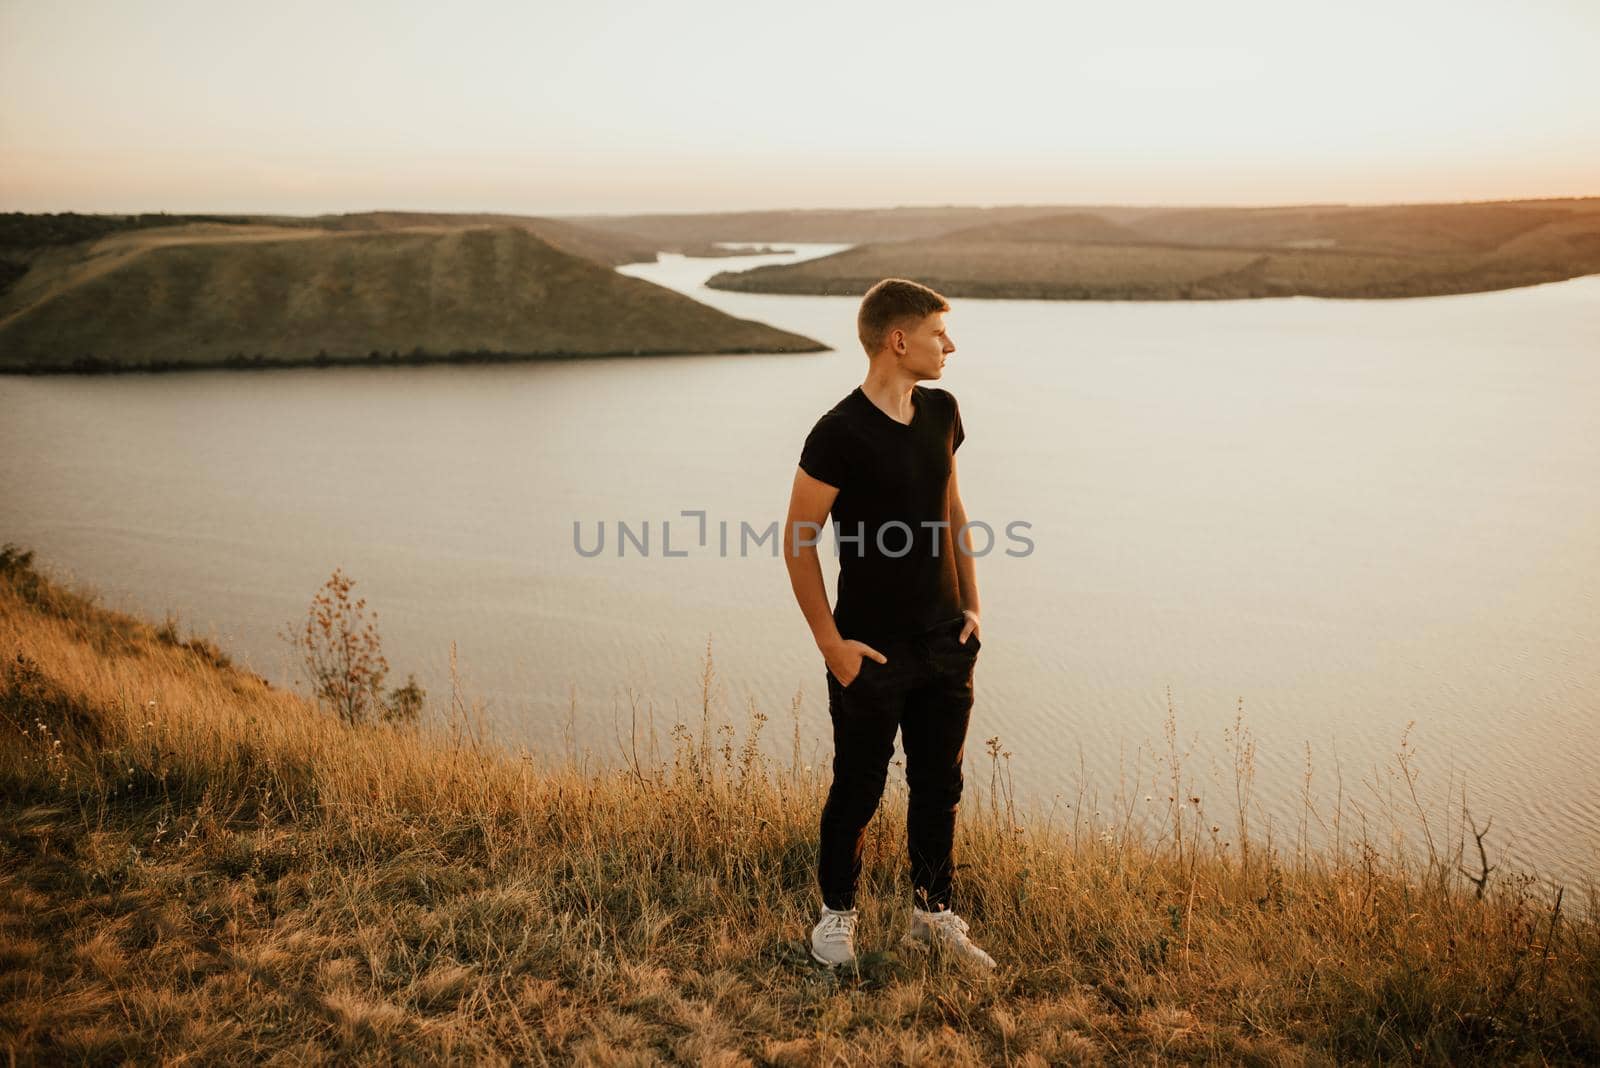 Bakota, Ukraine - 08.12.2020: A young athletic man in black casual clothes stands on the side of a mountain against the backdrop of a large lake and islands at sunset.